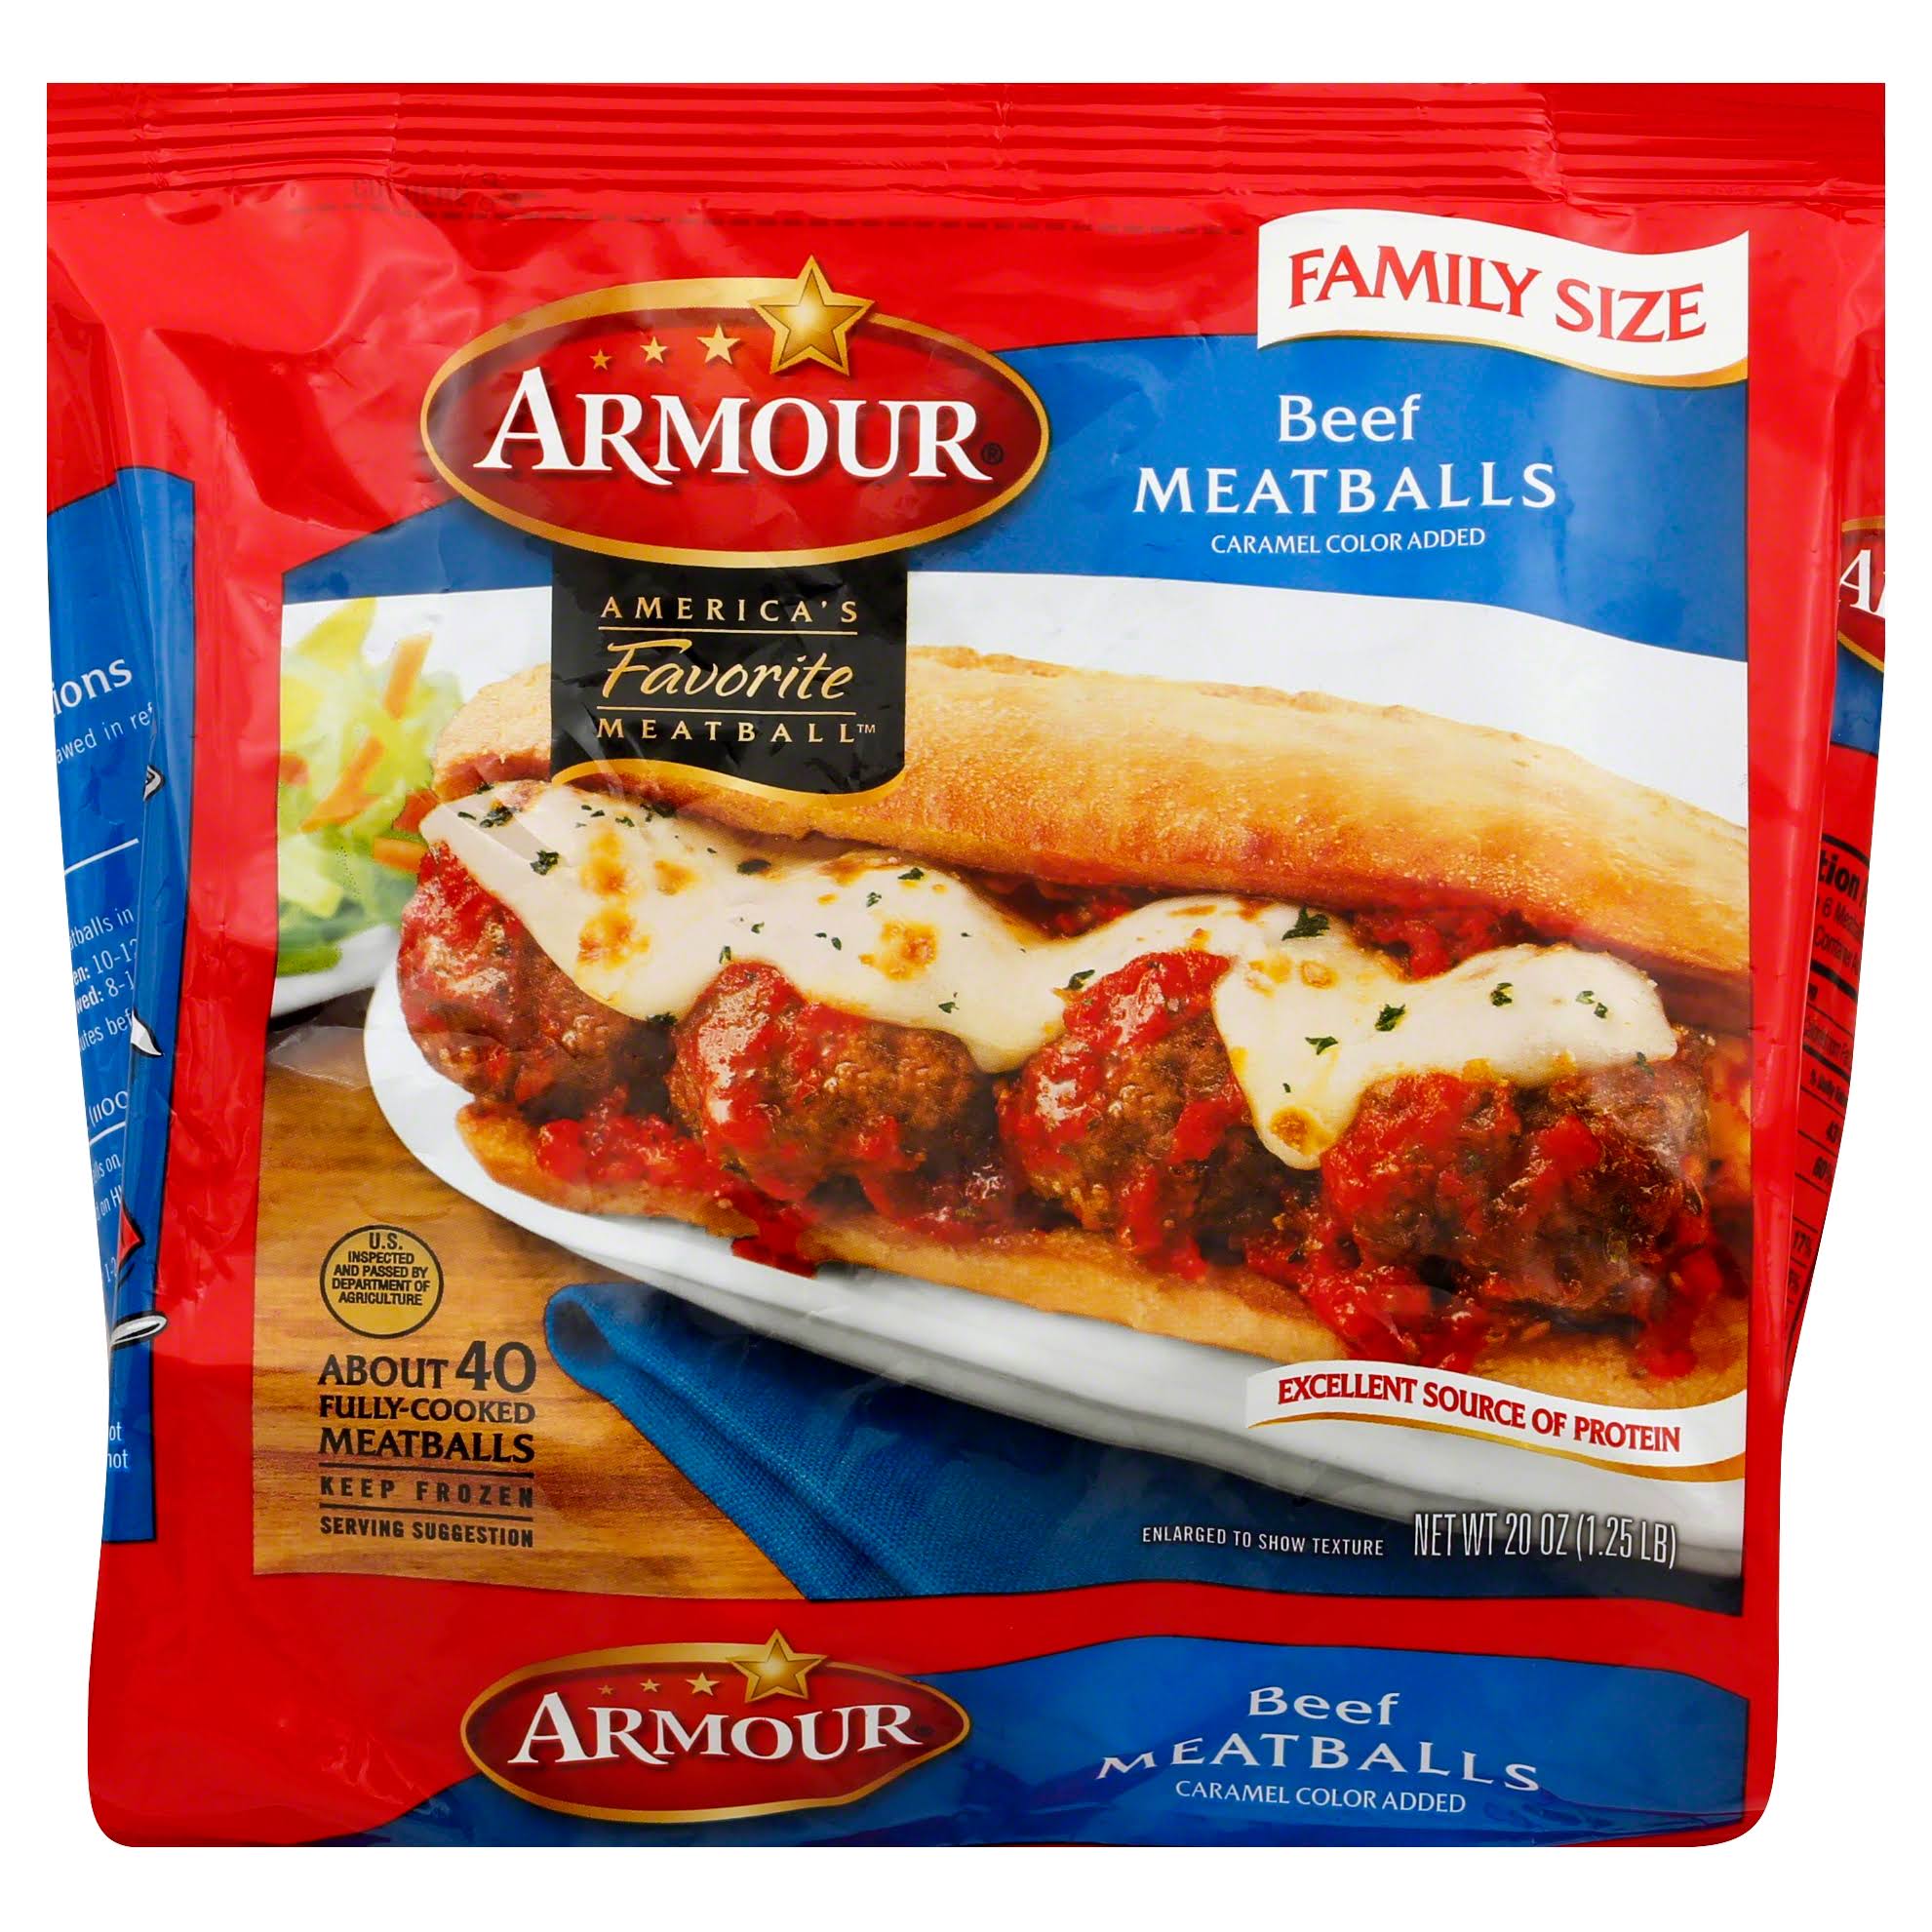 Armour Meatballs, Beef, Family Size - 20 oz